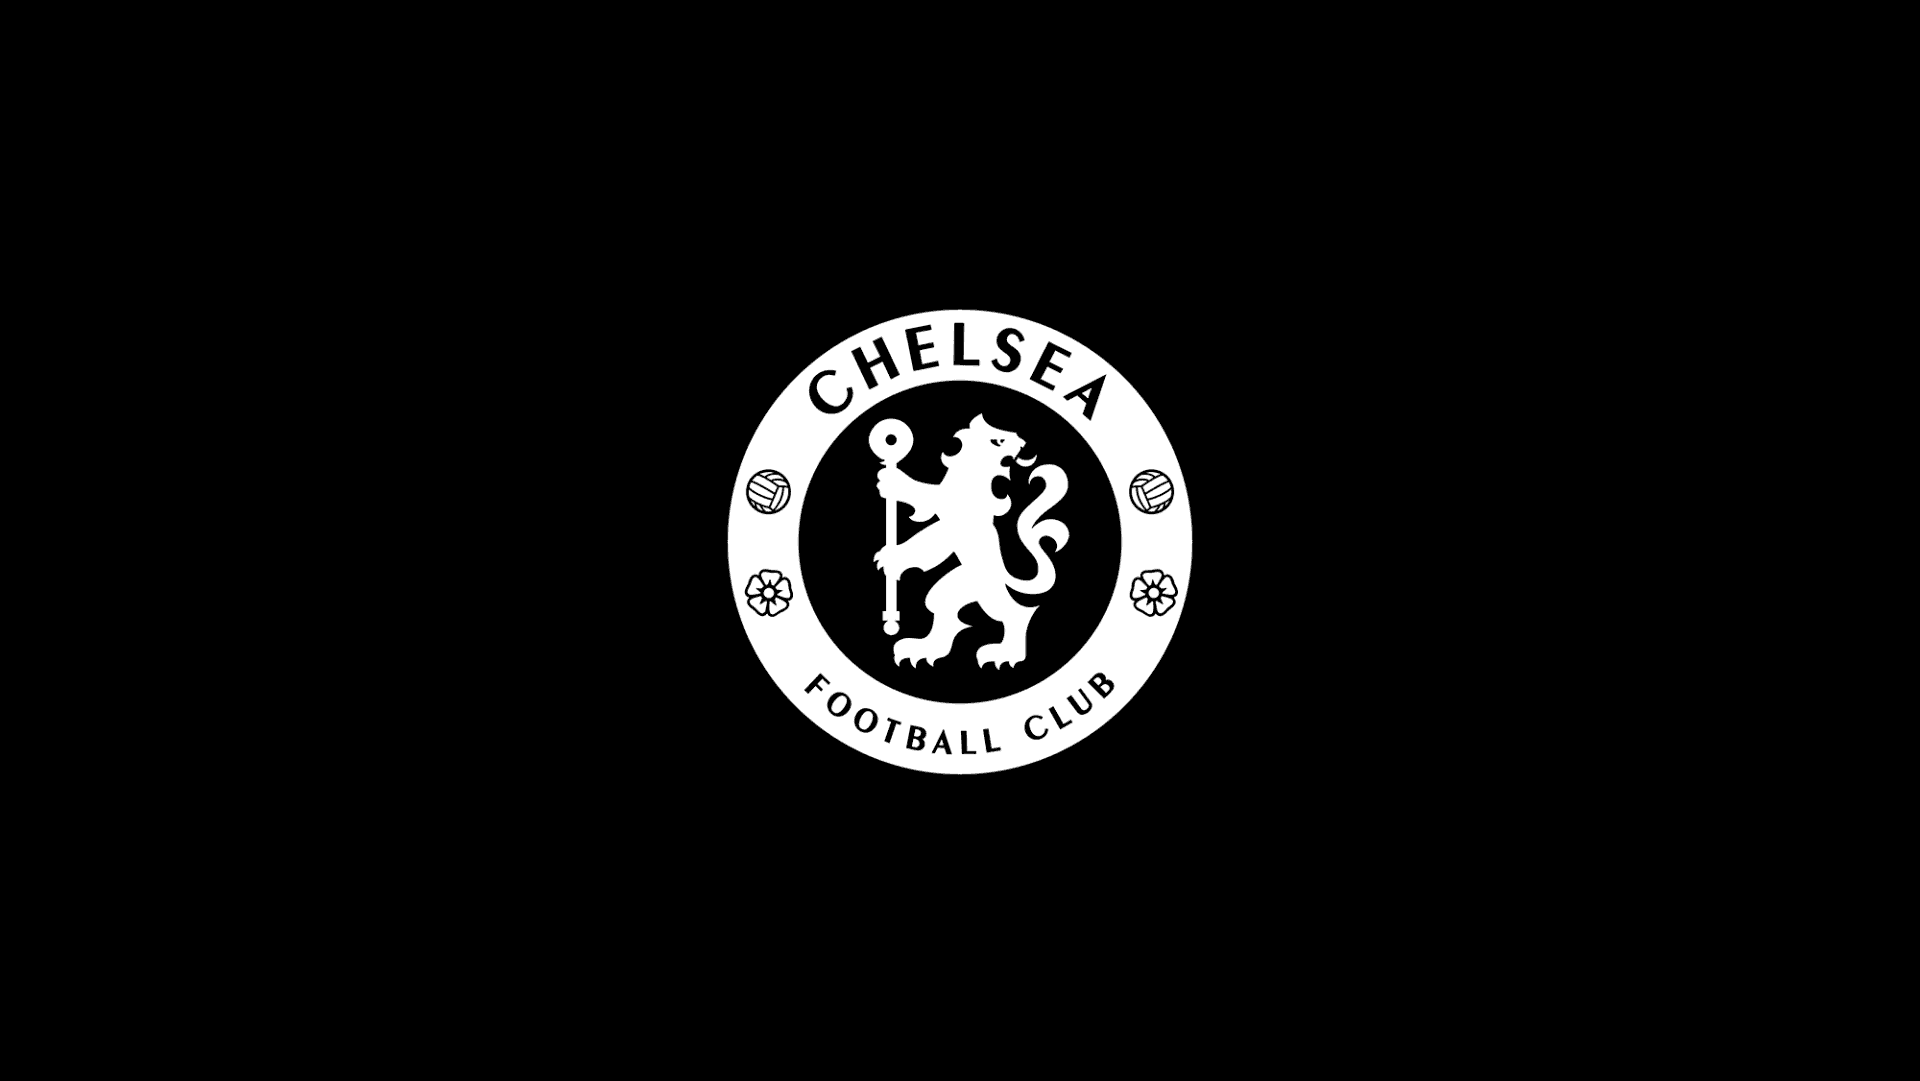 Download Chelsea Pictures | Wallpapers.com